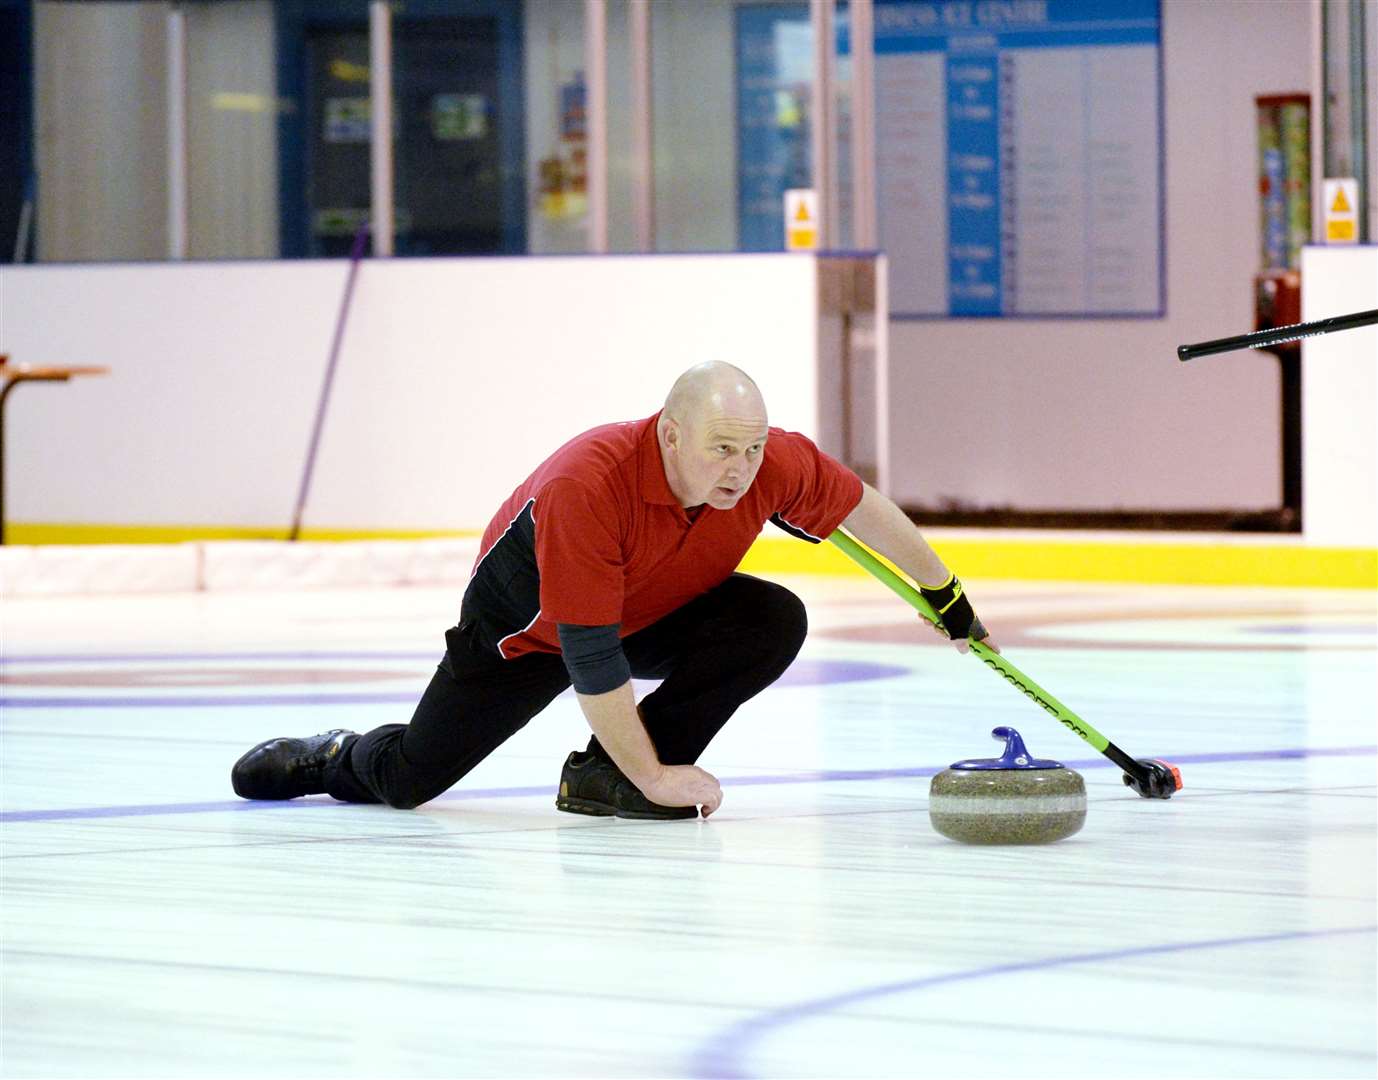 Highland Week of International Curling - Inverness Ice Rink..Gavin Nicol delivering a stone..Picture: James MacKenzie..